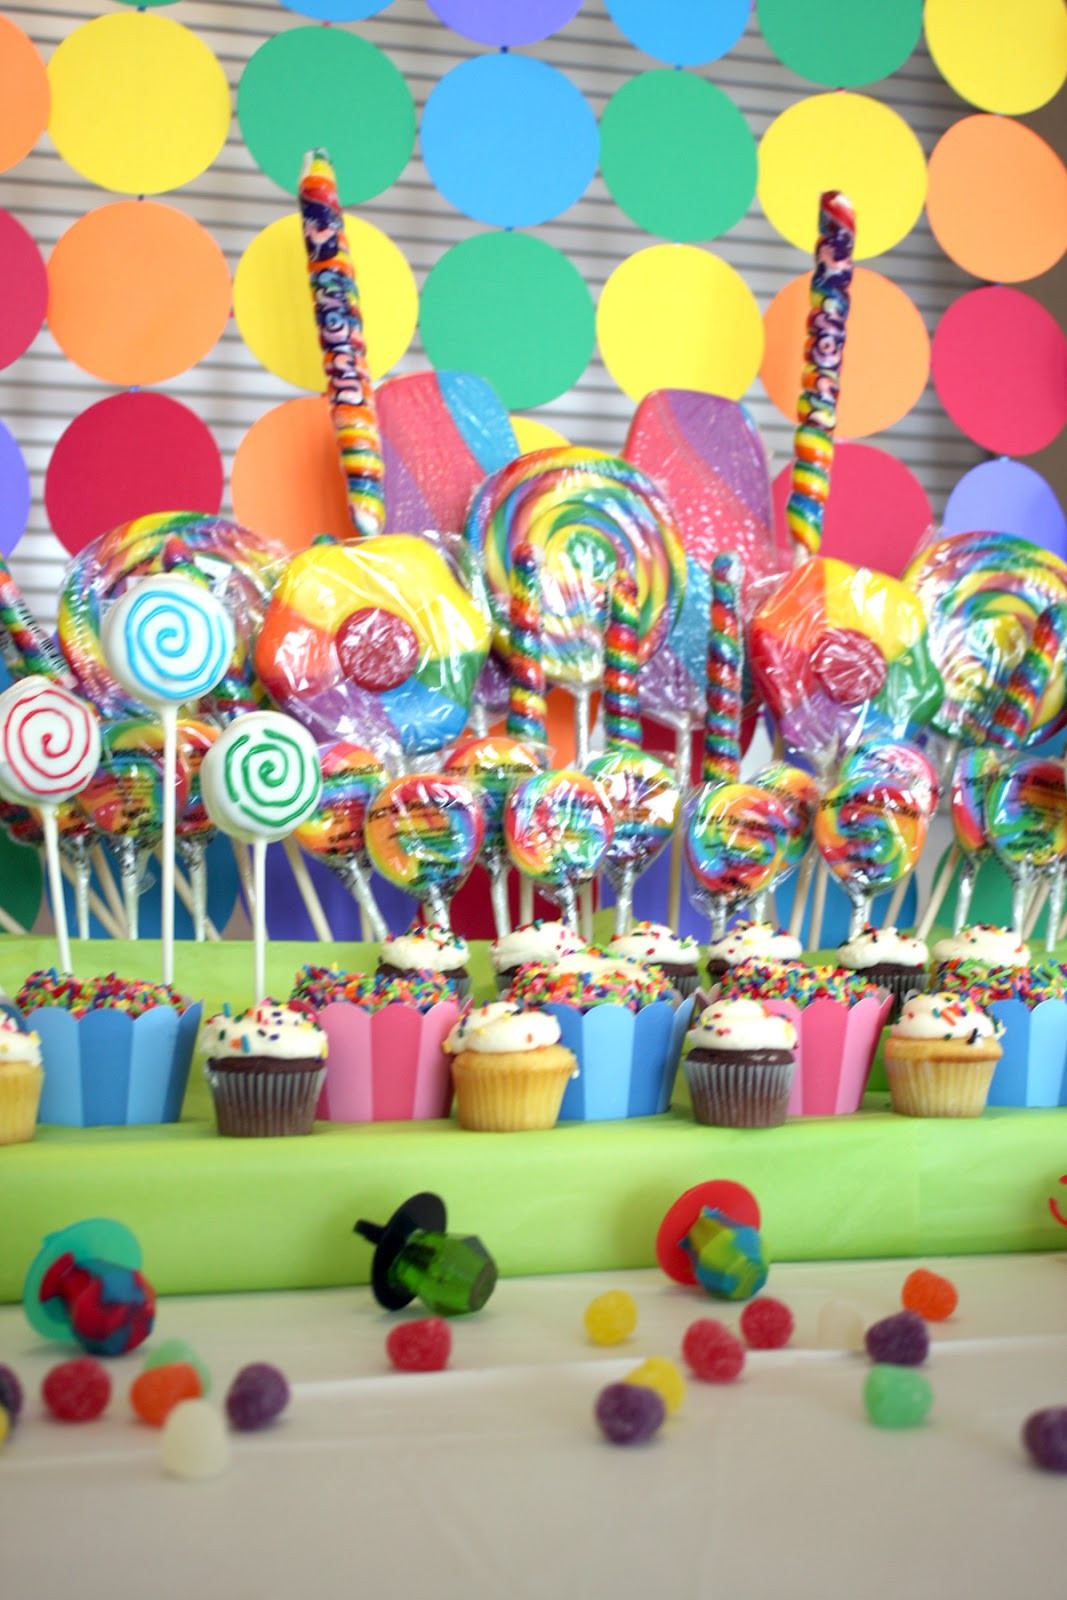 Candyland Birthday Party Ideas
 The Everyday Posh Candy Land Birthday Party